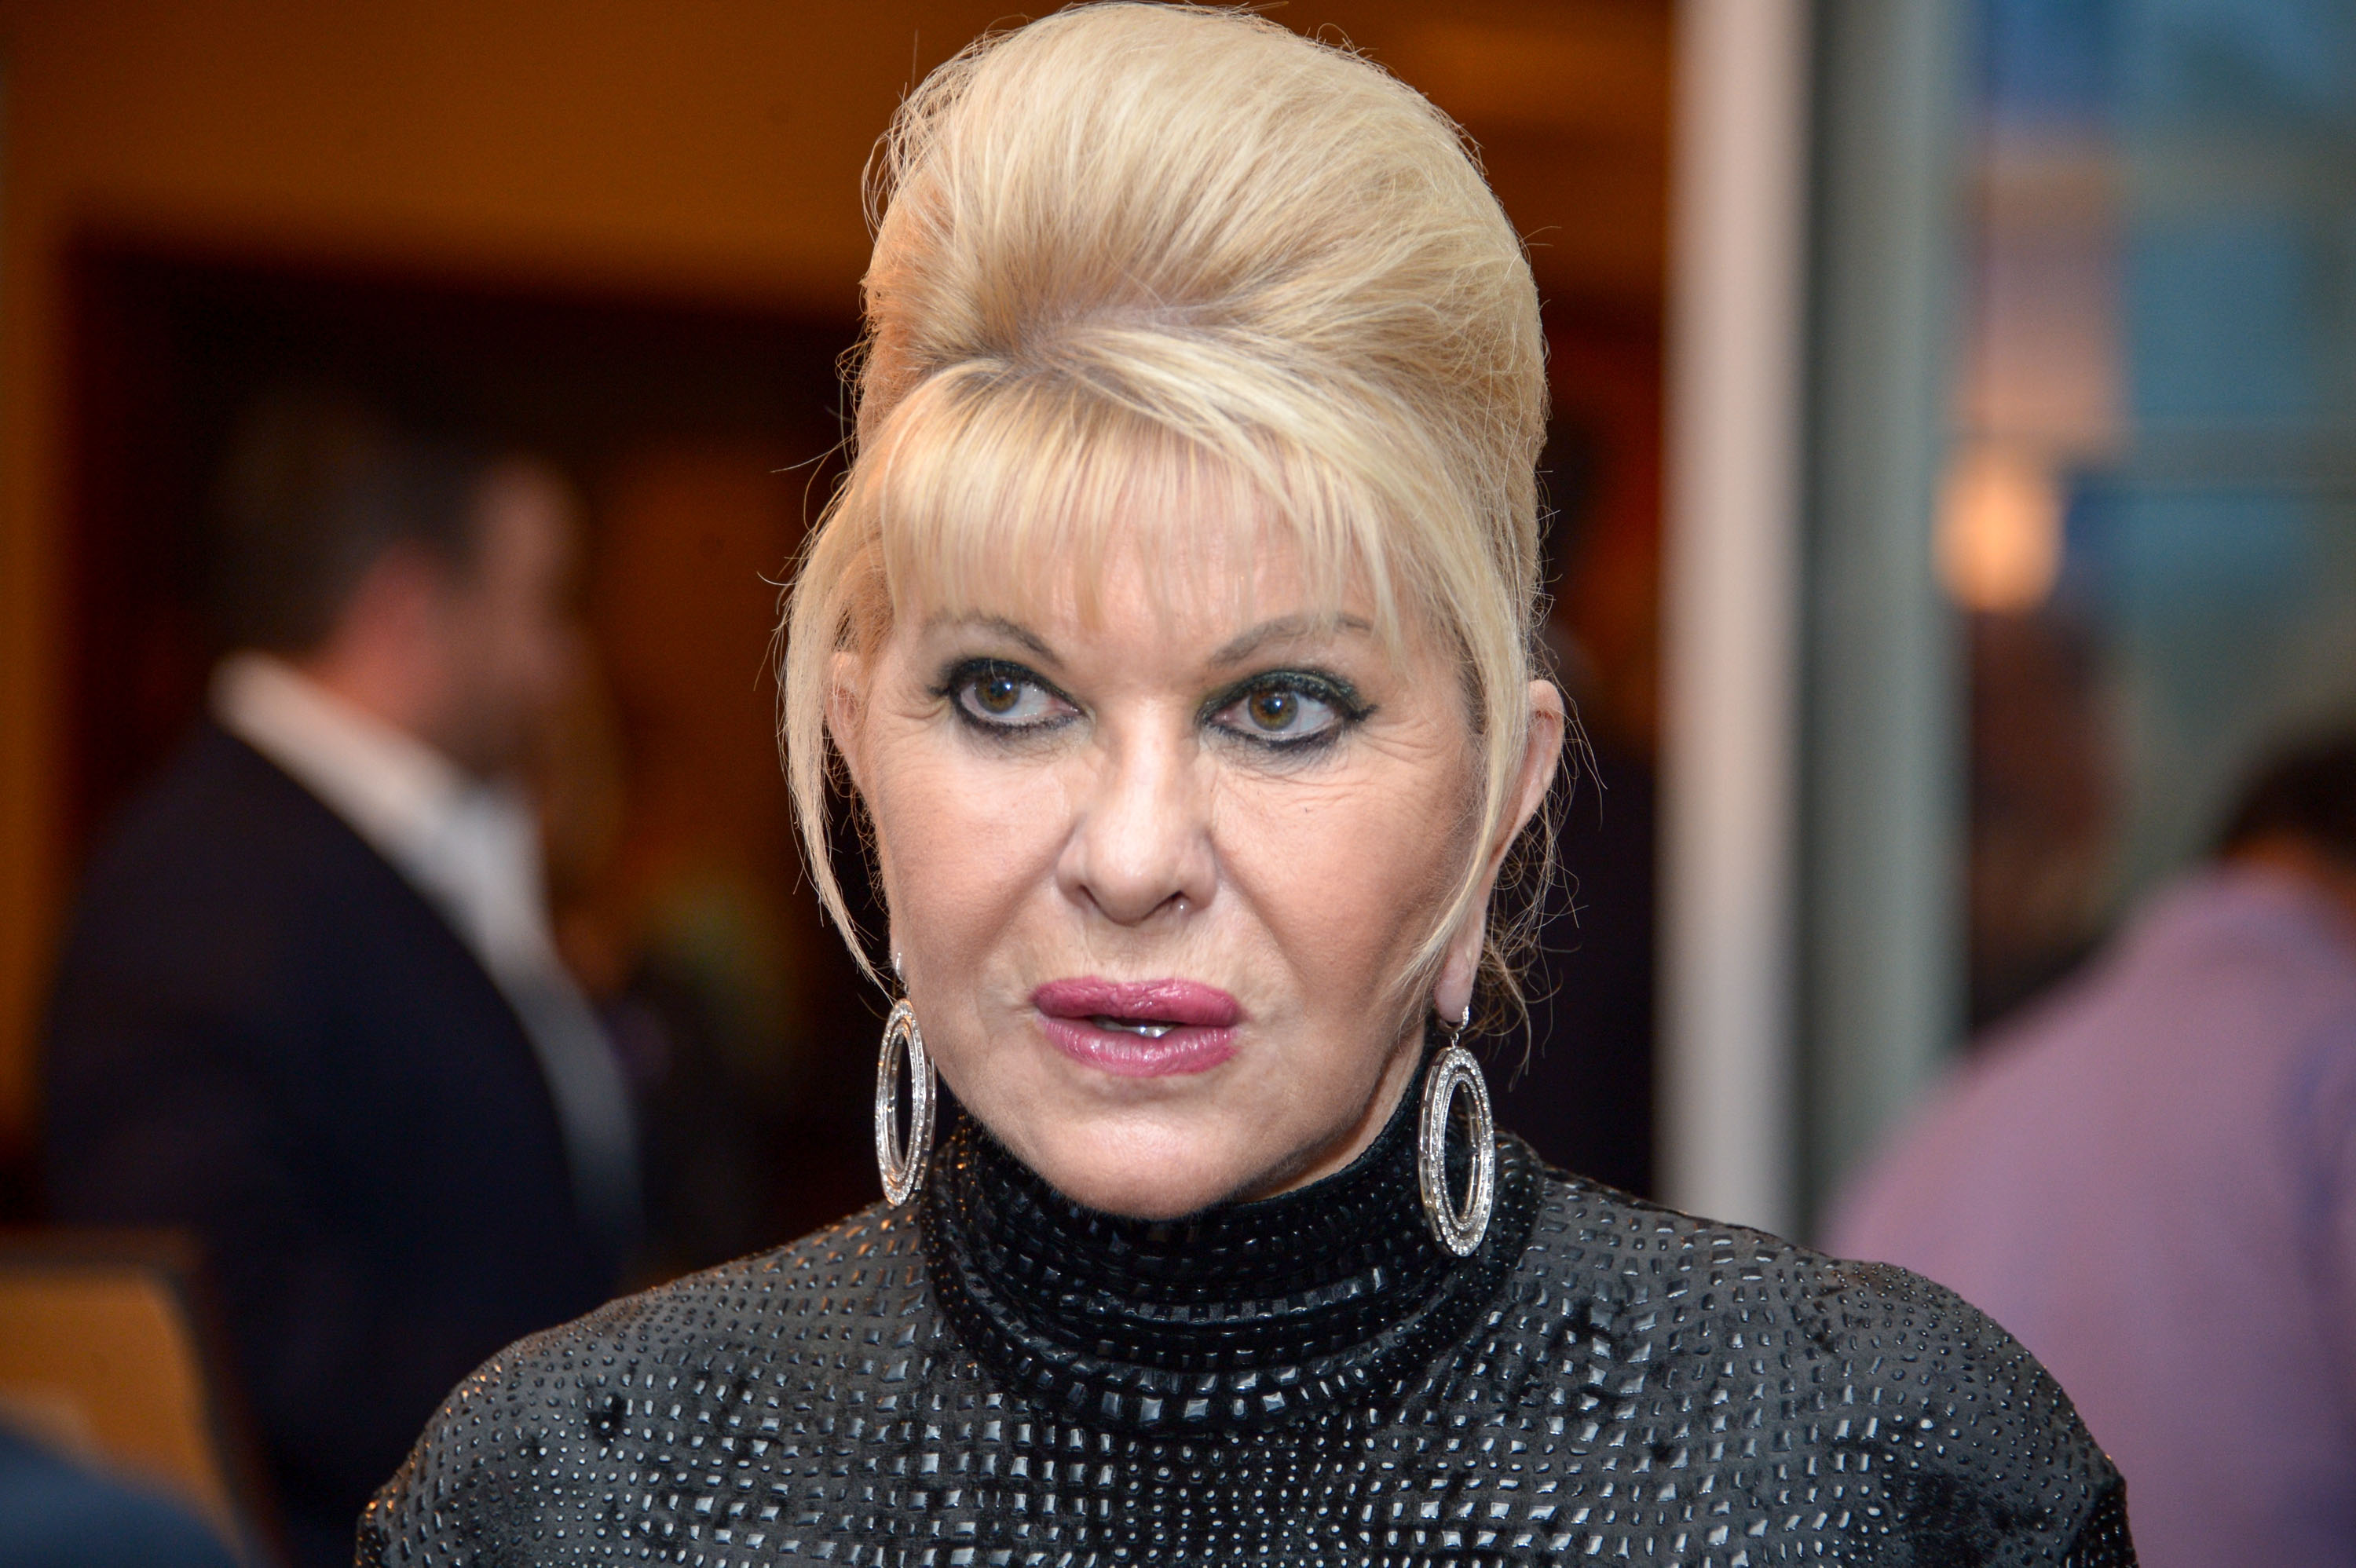 Ivana Trump attends the 9th Annual Eric Trump Foundation Golf Invitational Auction &amp; Dinner at Trump National Golf Club Westchester on September 21, 2015 in Briarcliff Manor, New York. (Grant Lamos IV&mdash;Getty Images)